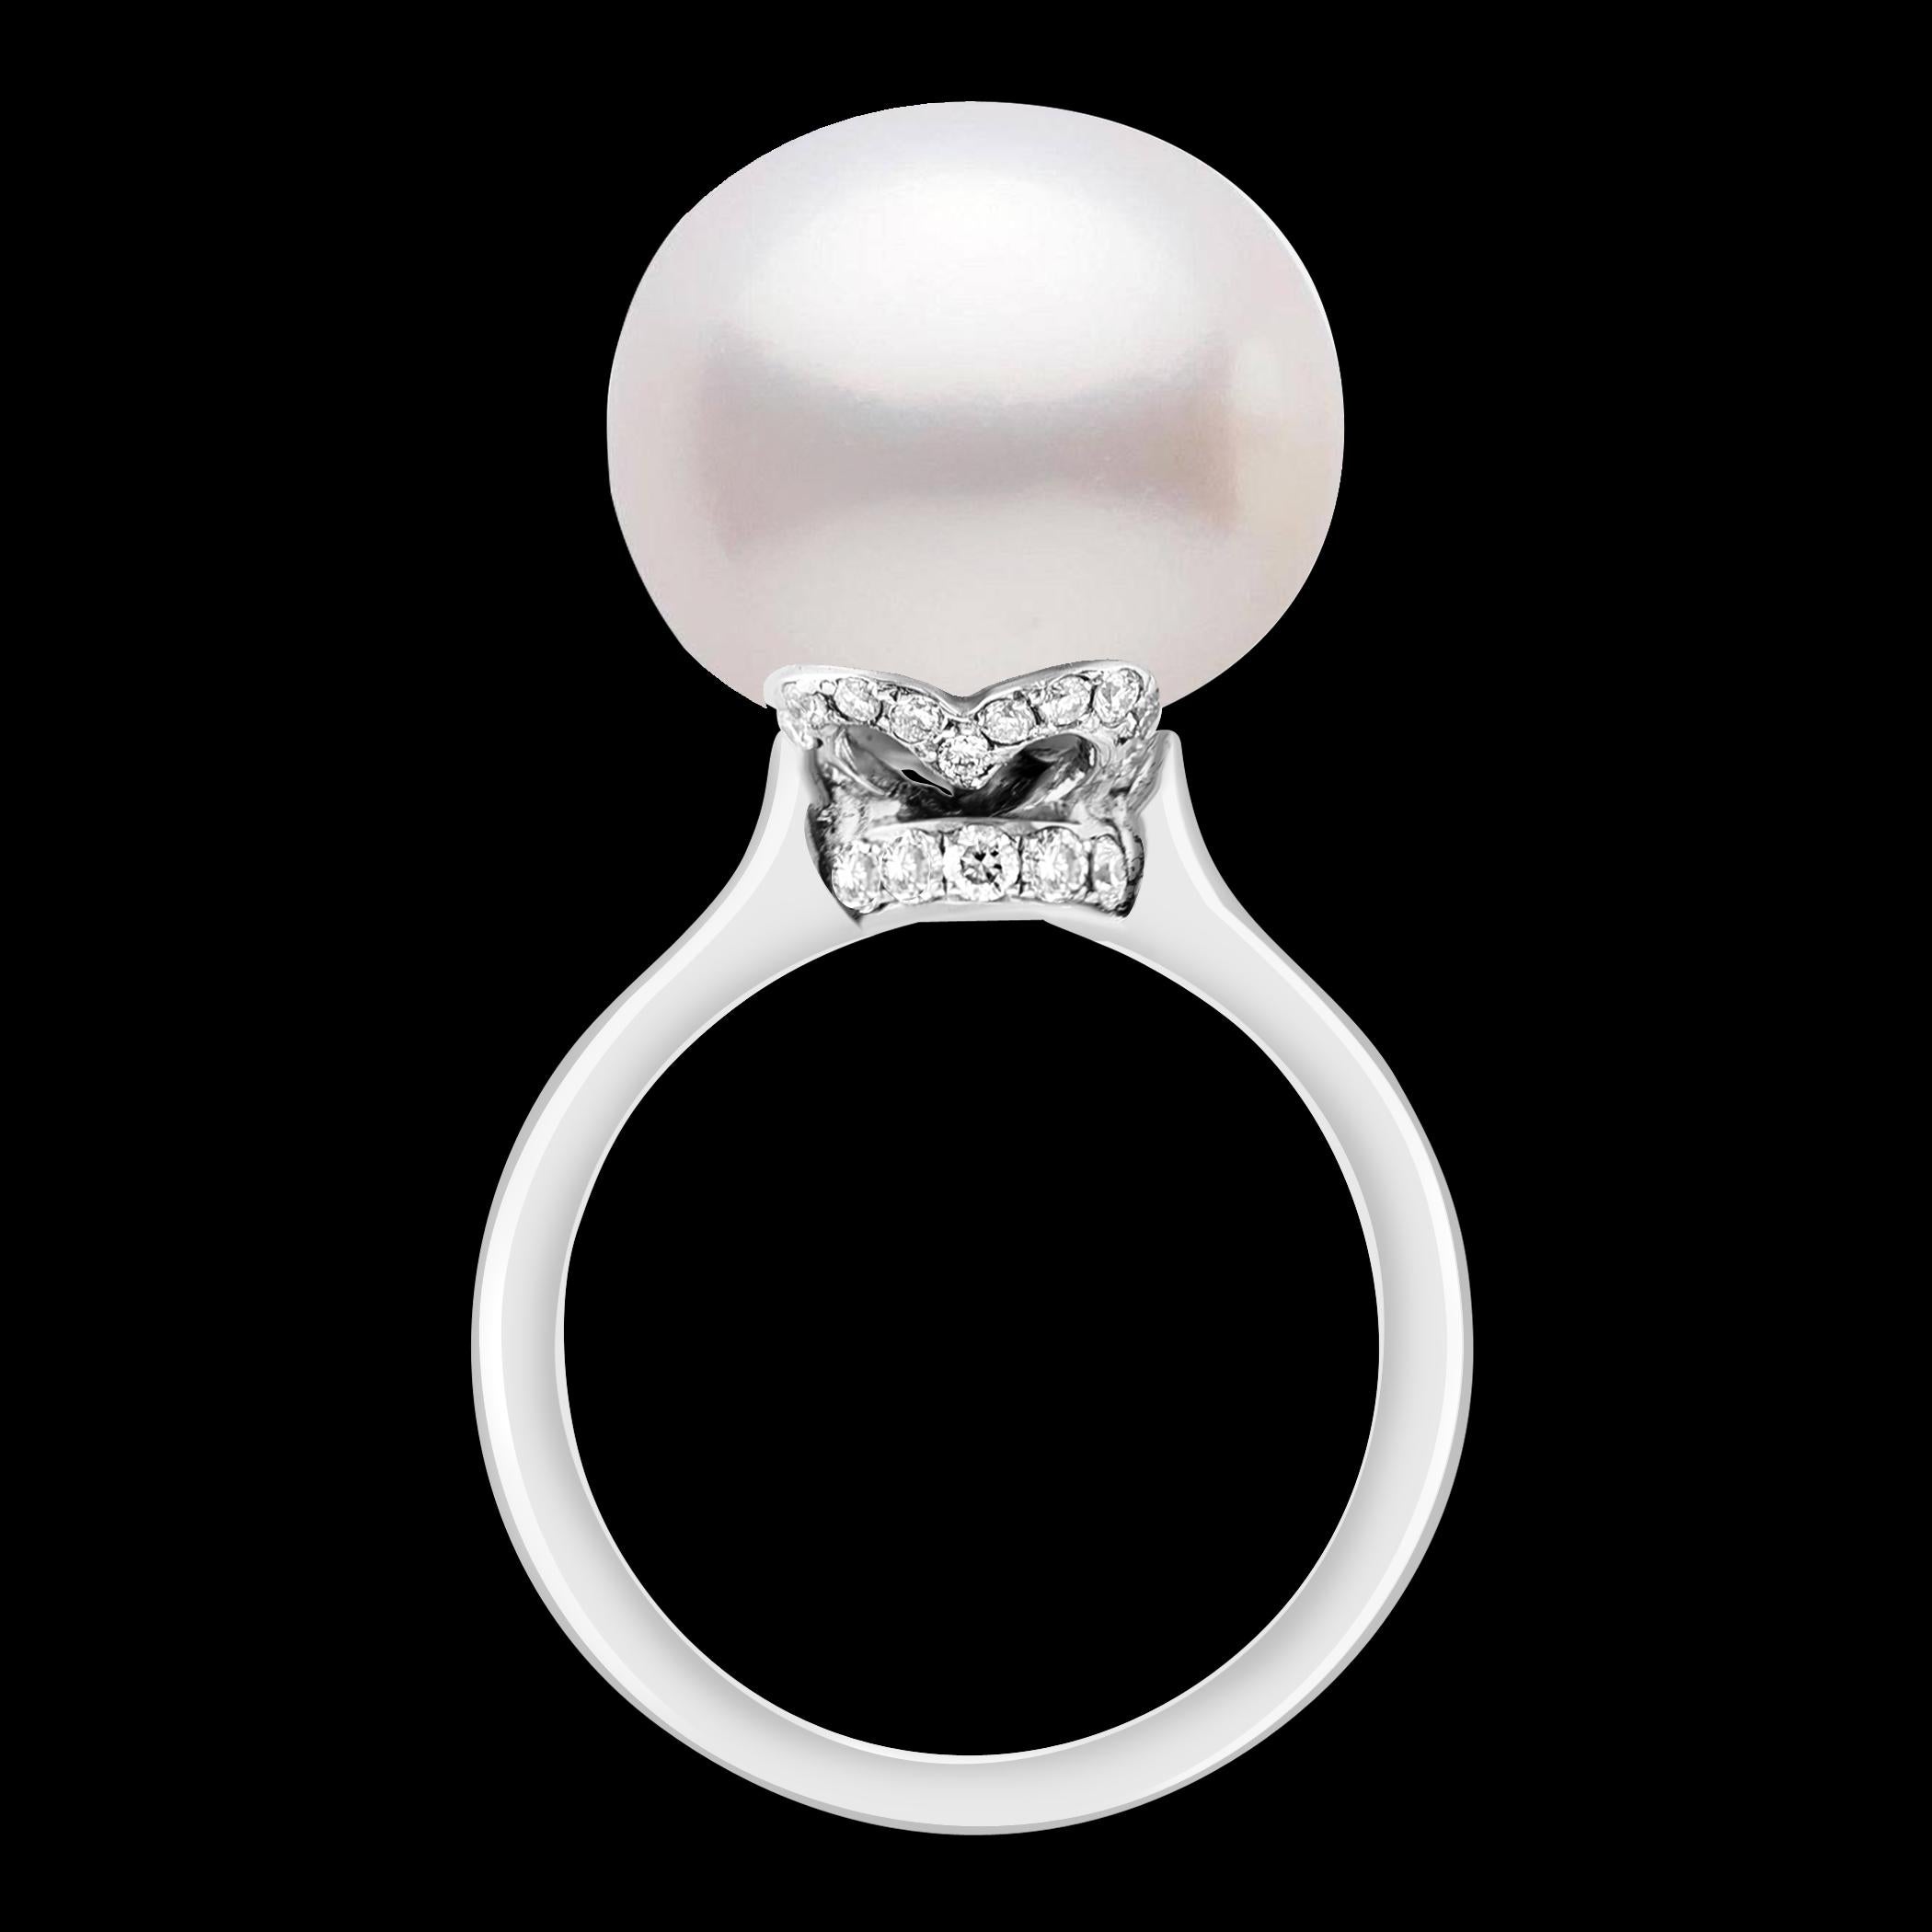 Presenting the magnificent 15.5mm South Sea Pearl and Diamond Ring by renowned designer Valentin Magro. This exquisite cocktail ring showcases timeless elegance and is crafted from platinum, a symbol of luxury and durability. 

At the heart of this